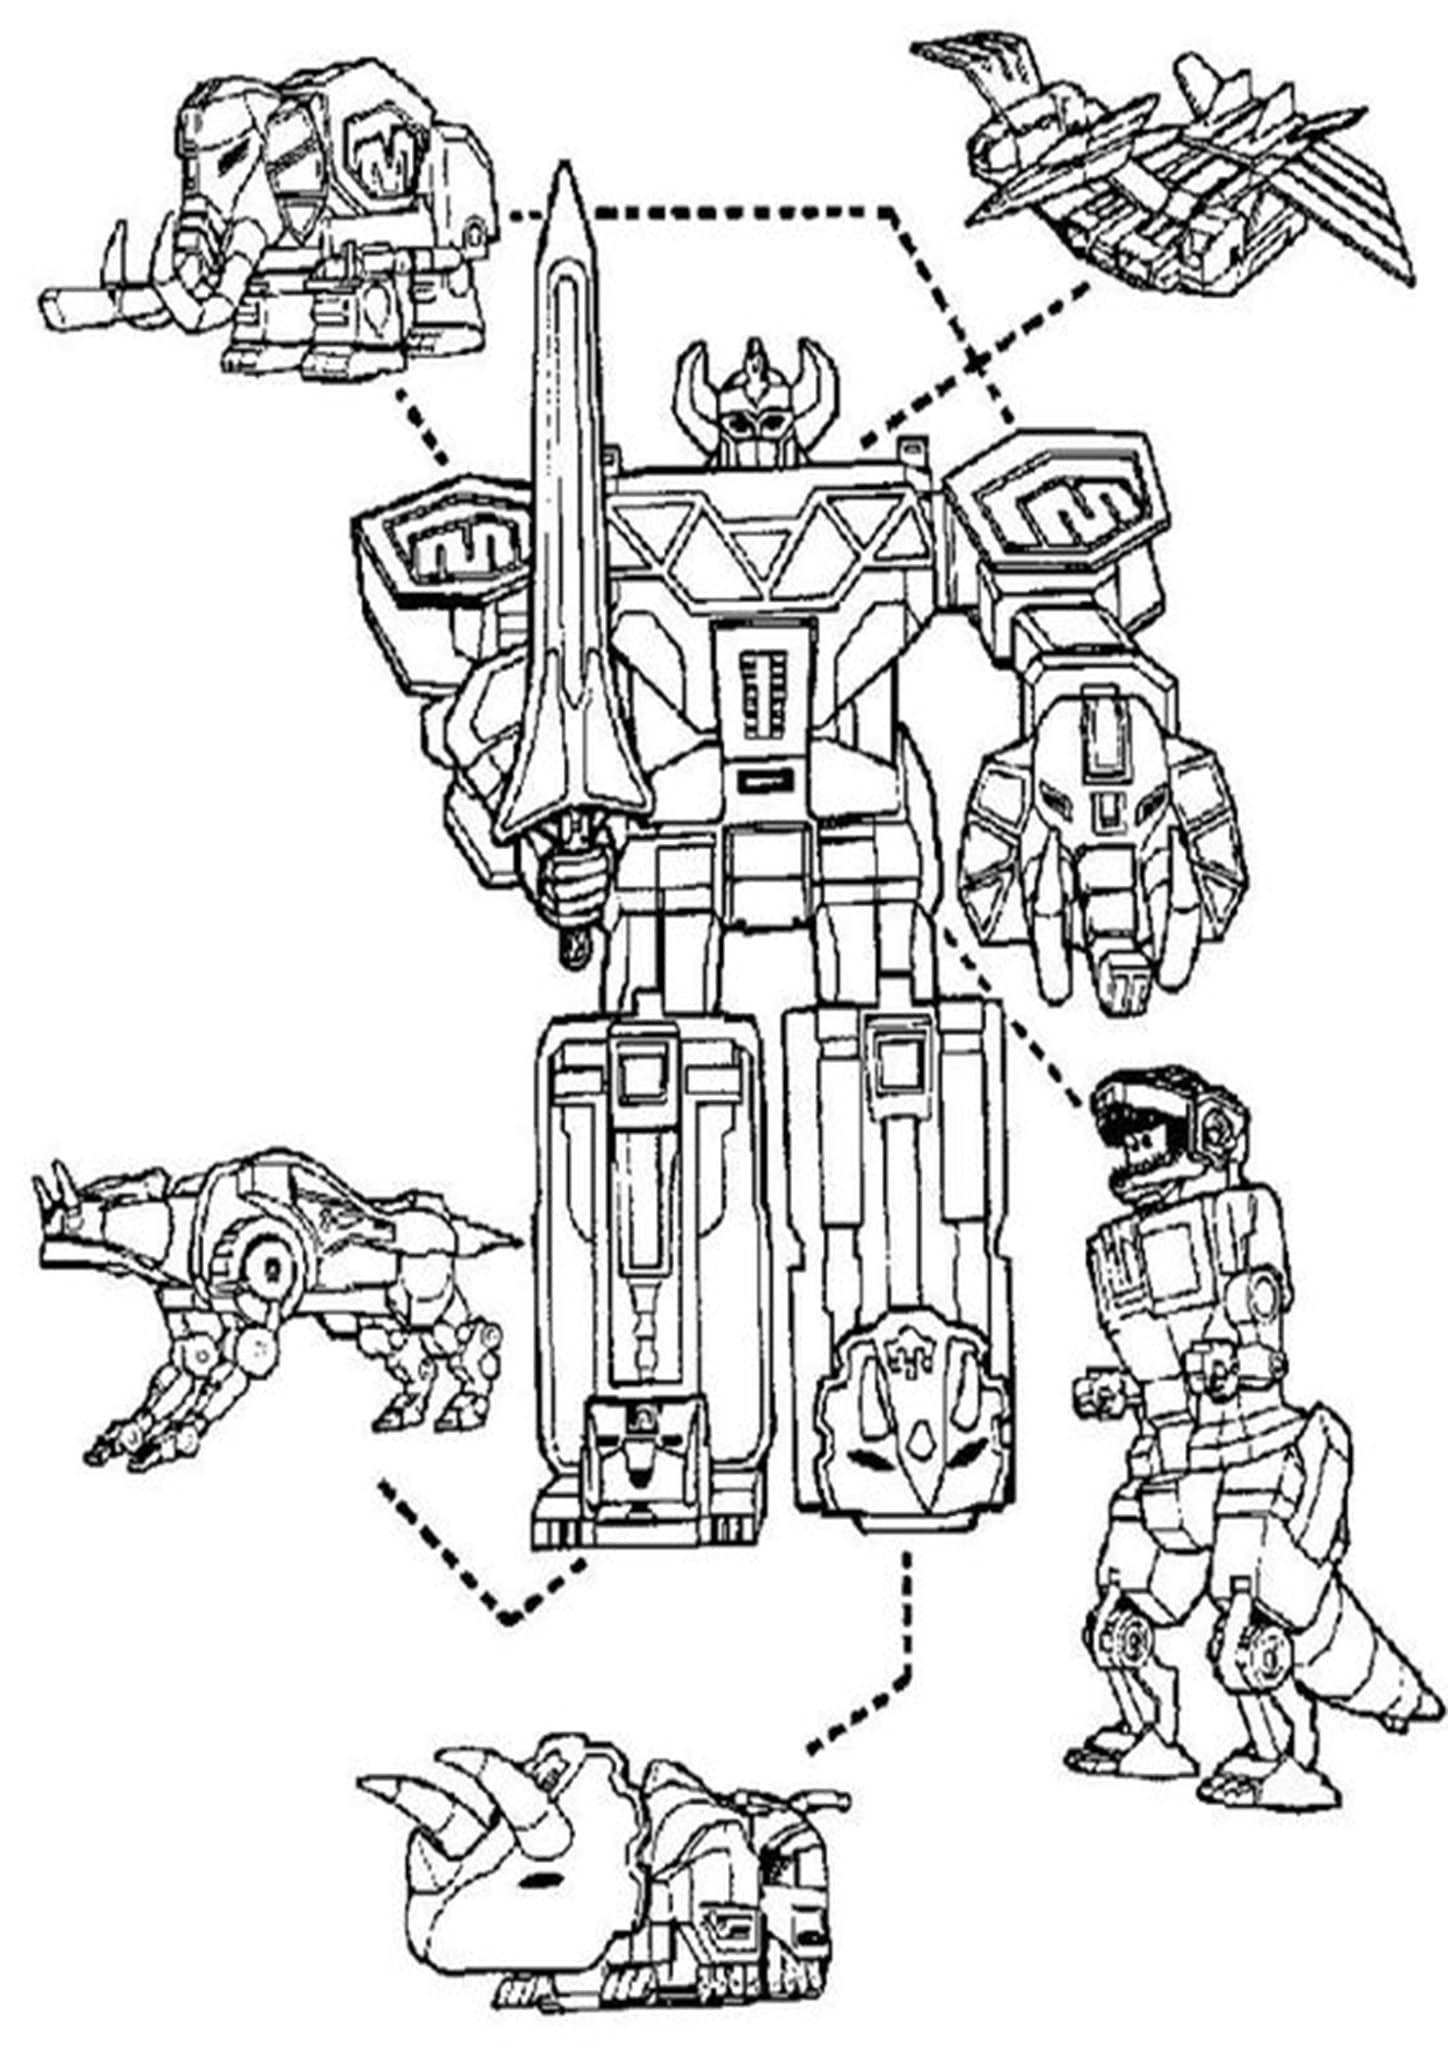 free-easy-to-print-power-rangers-coloring-pages-tulamama